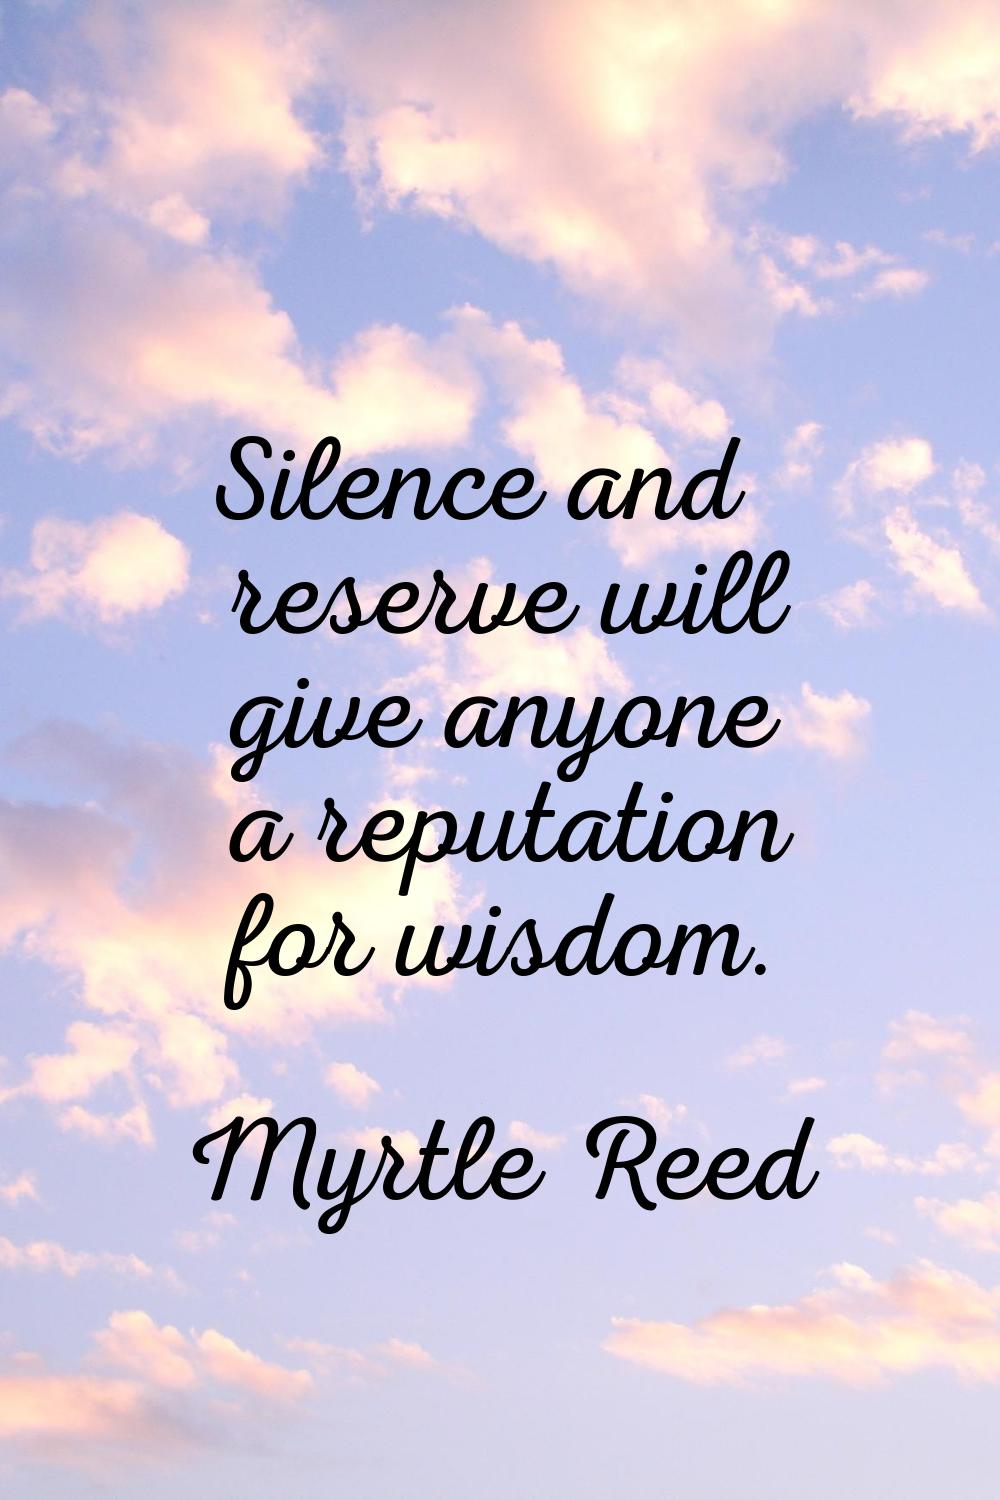 Silence and reserve will give anyone a reputation for wisdom.